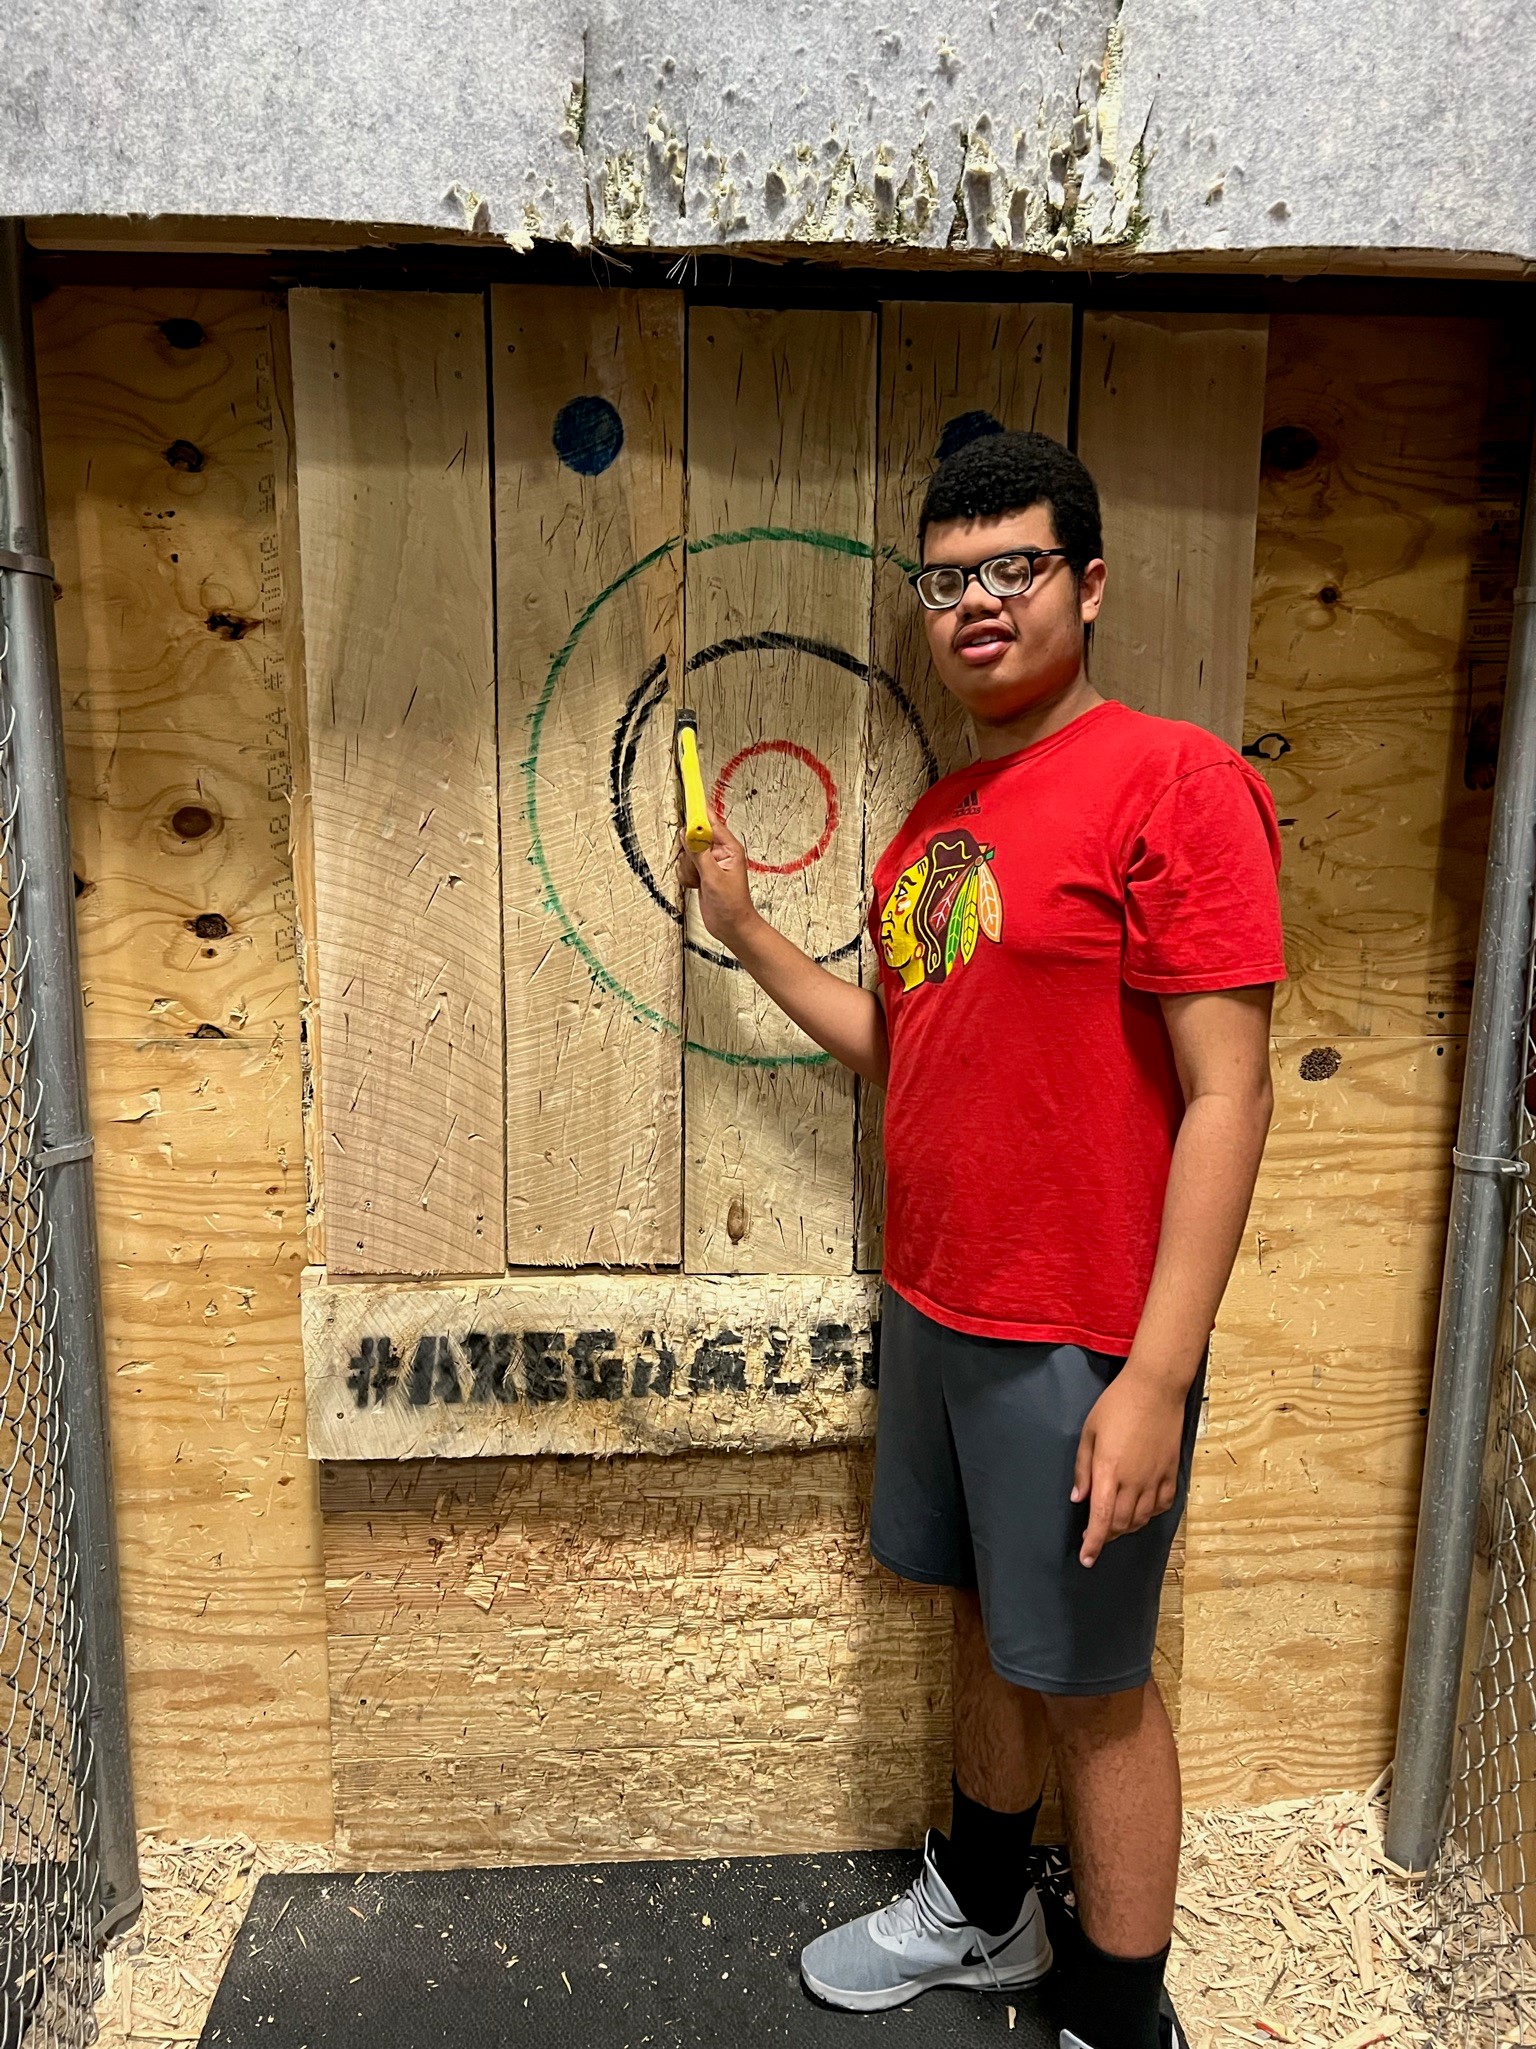 A young man wearing glasses is standing in fron of a axe throwing target. He is pointing at the axe he threw just outside of the bullseye.